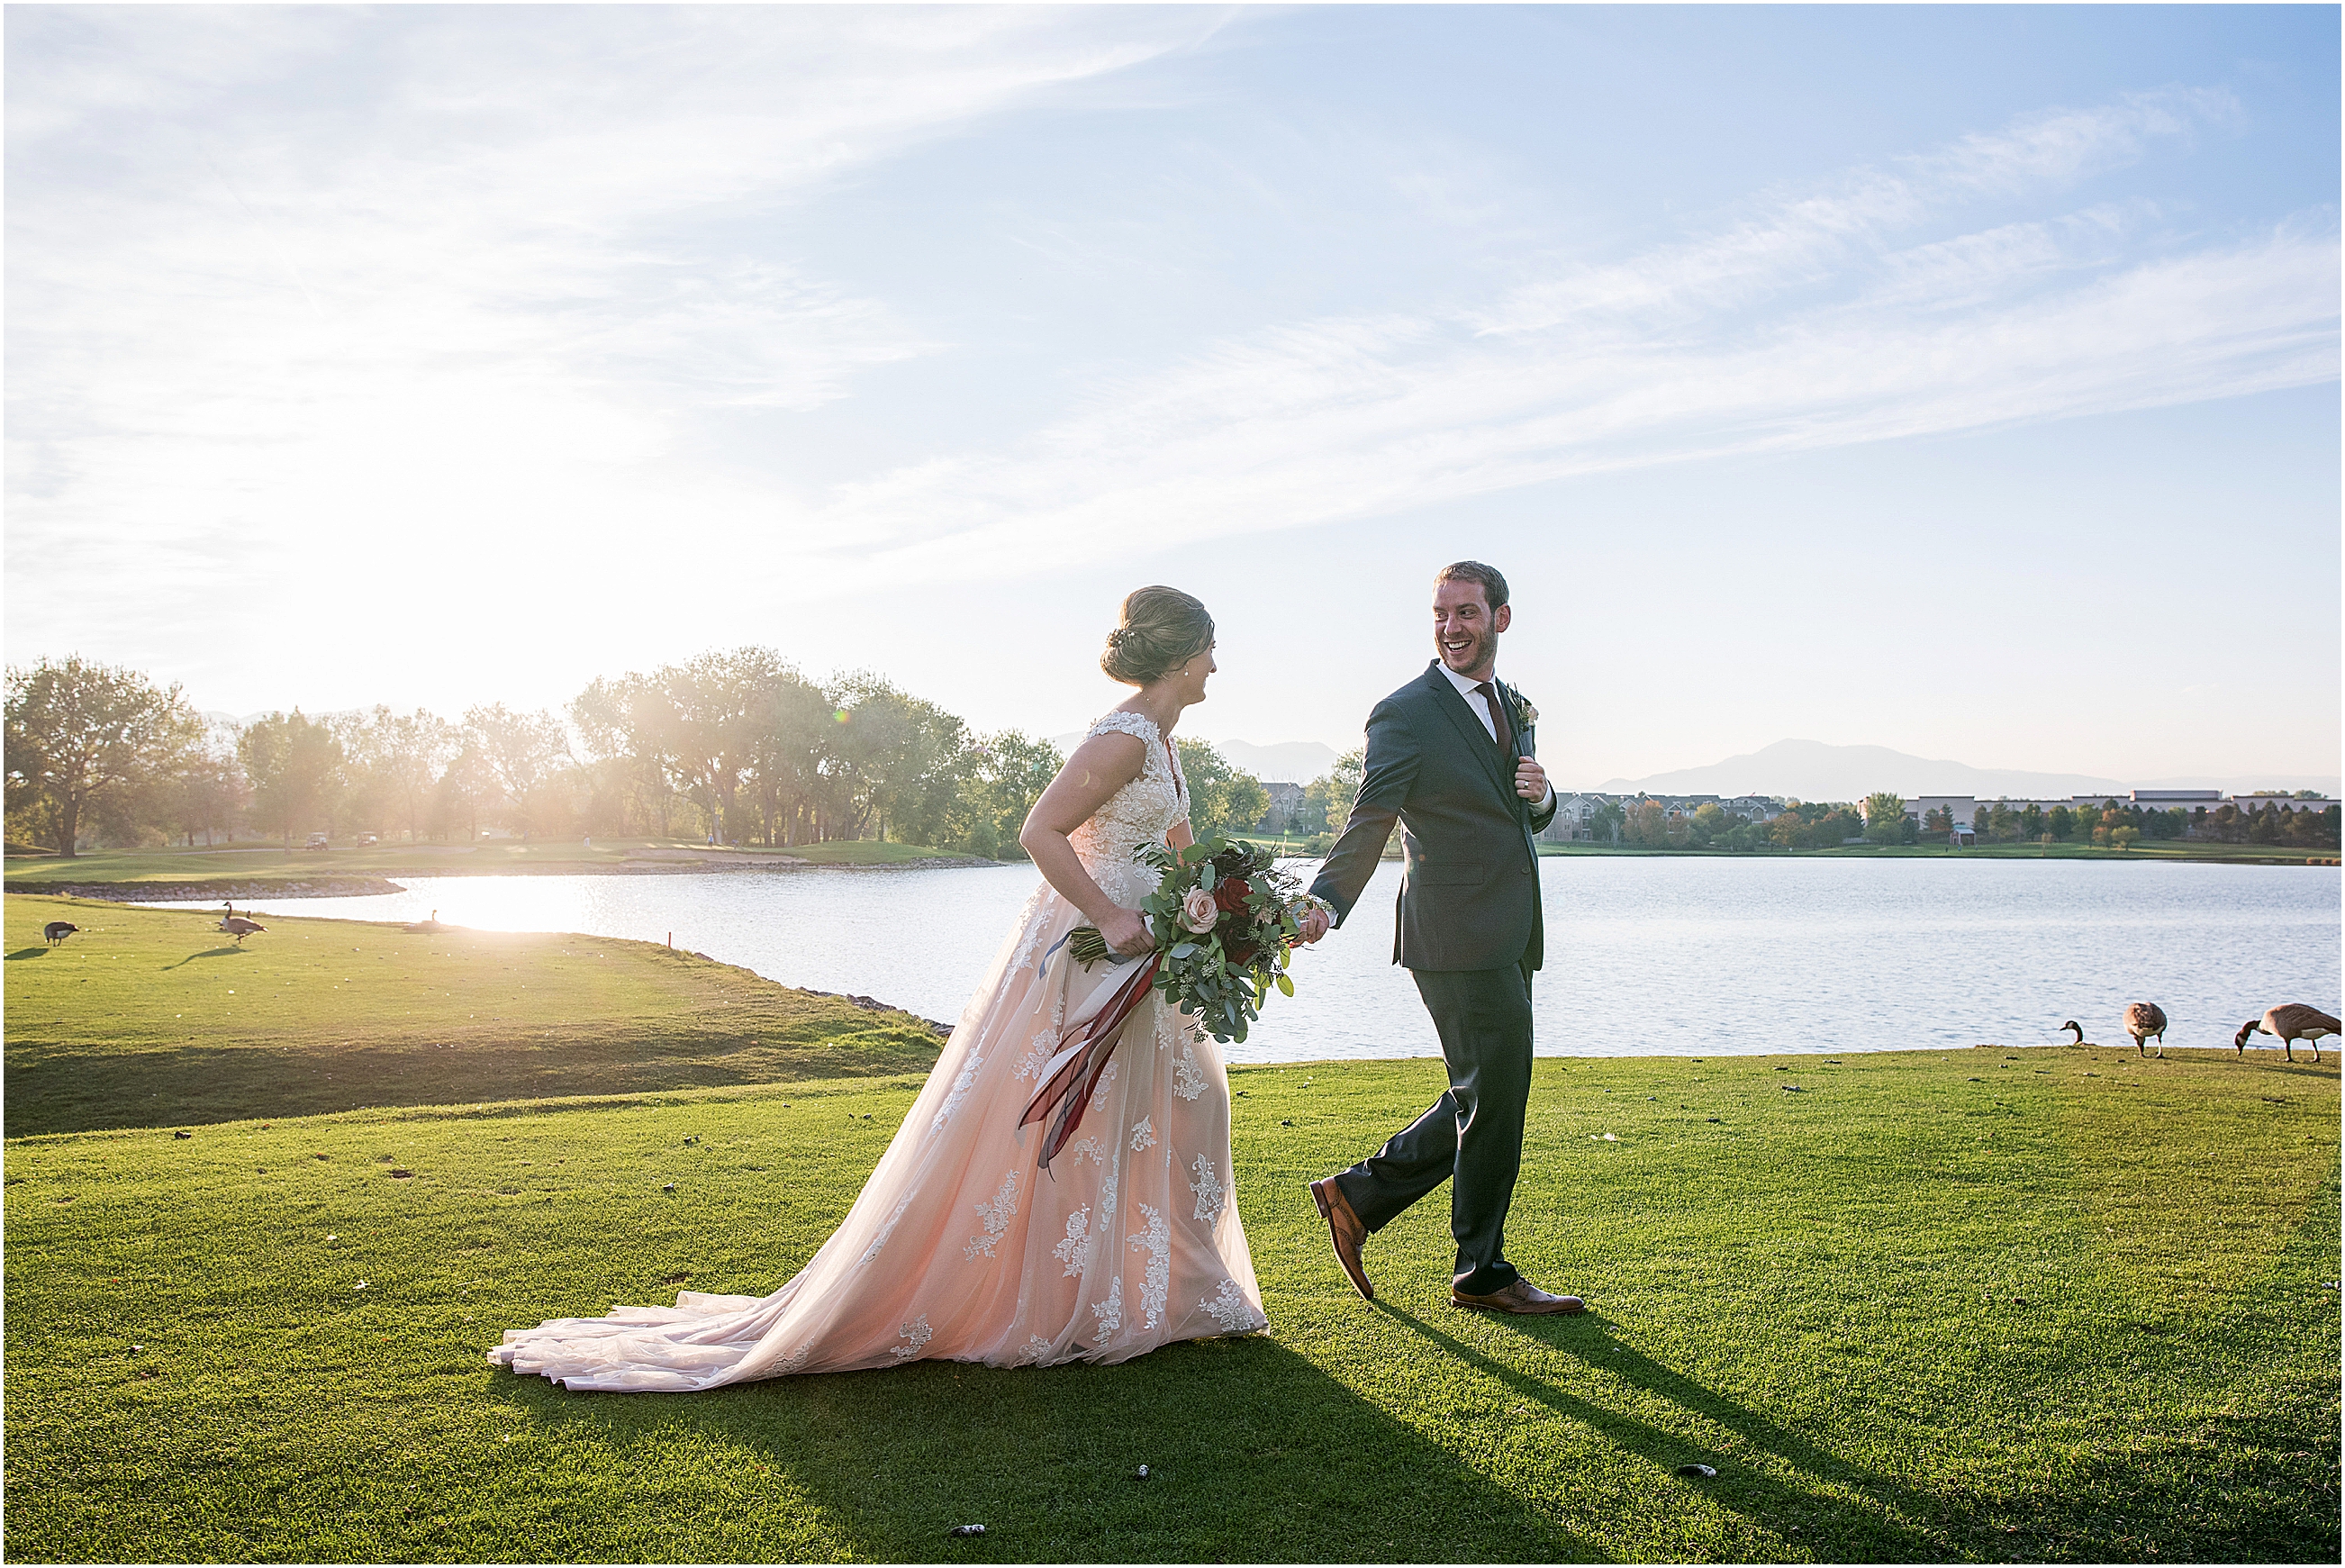 taken at sunset, bride and groom walk holding hands, groom leads bride, bride is holding bouquet and smiling at the groom, there are geese and a pond